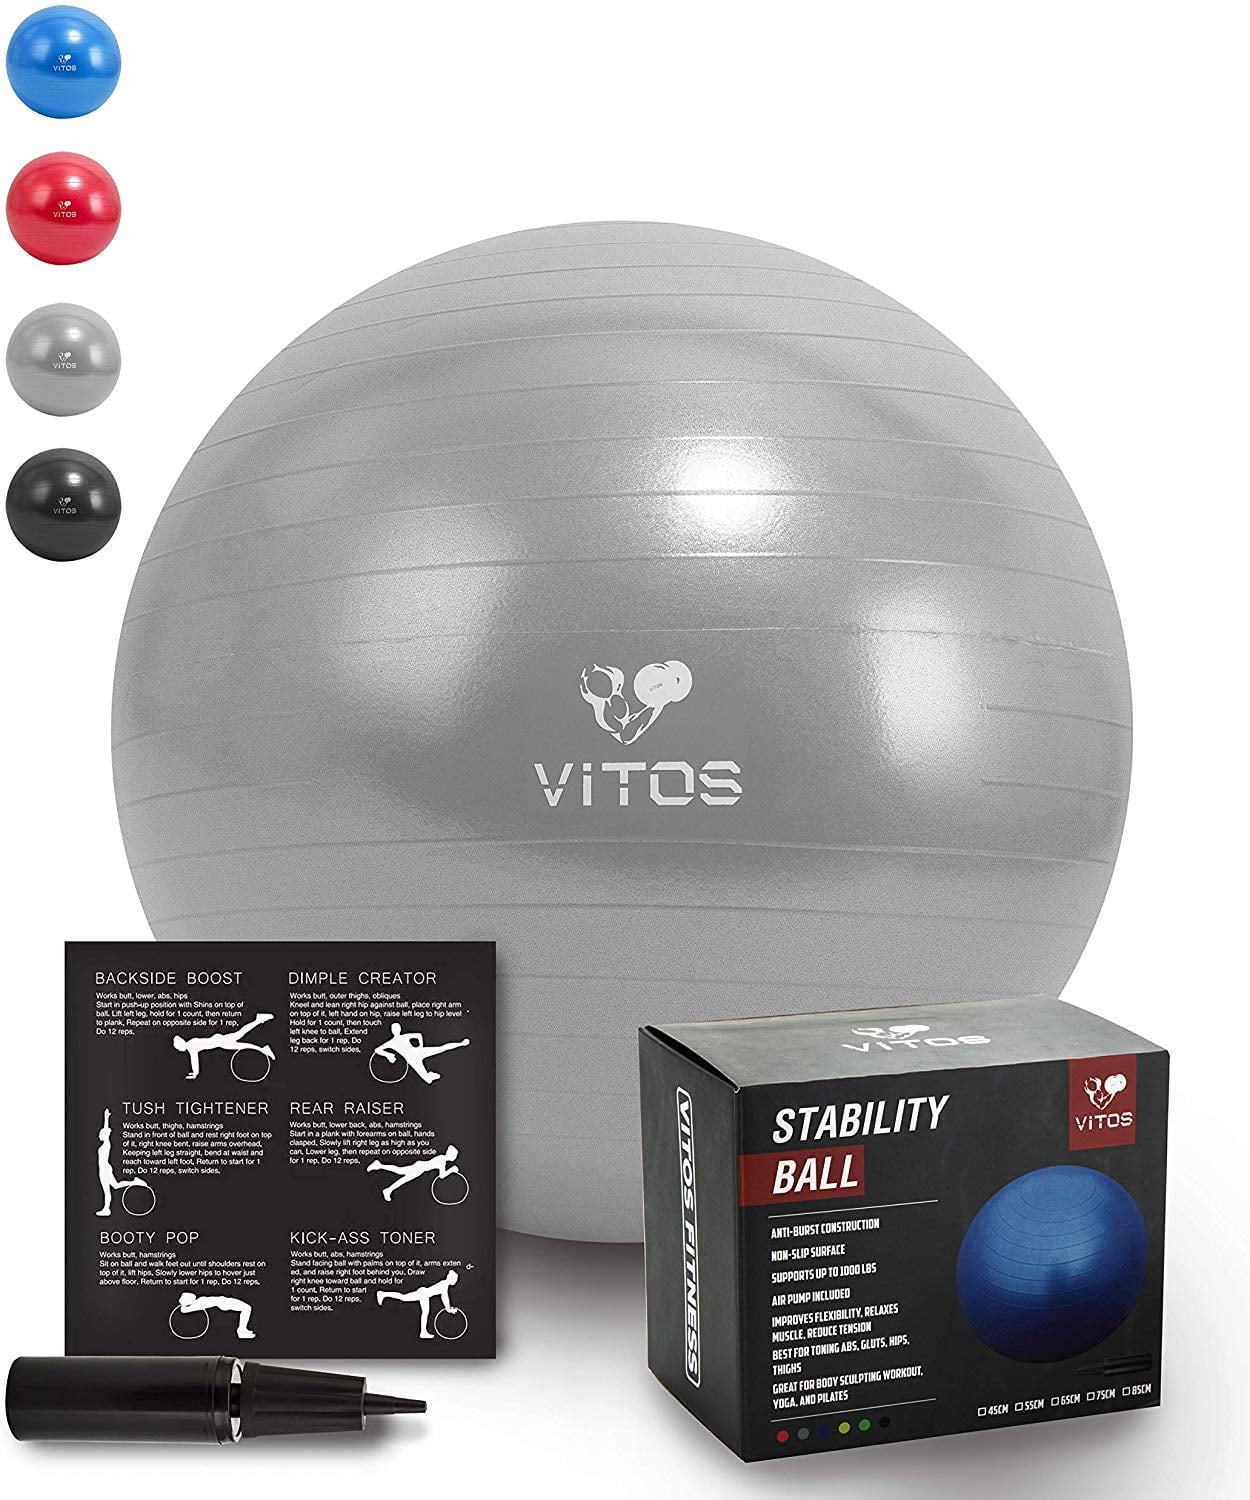 Extra Thick Non Slip Supports 2200LB for Fitness Stability Birth Balance Pilates Workout Guide Quick Pump Included Professional Quality Design Vitos Anti Burst Exercise Yoga Ball